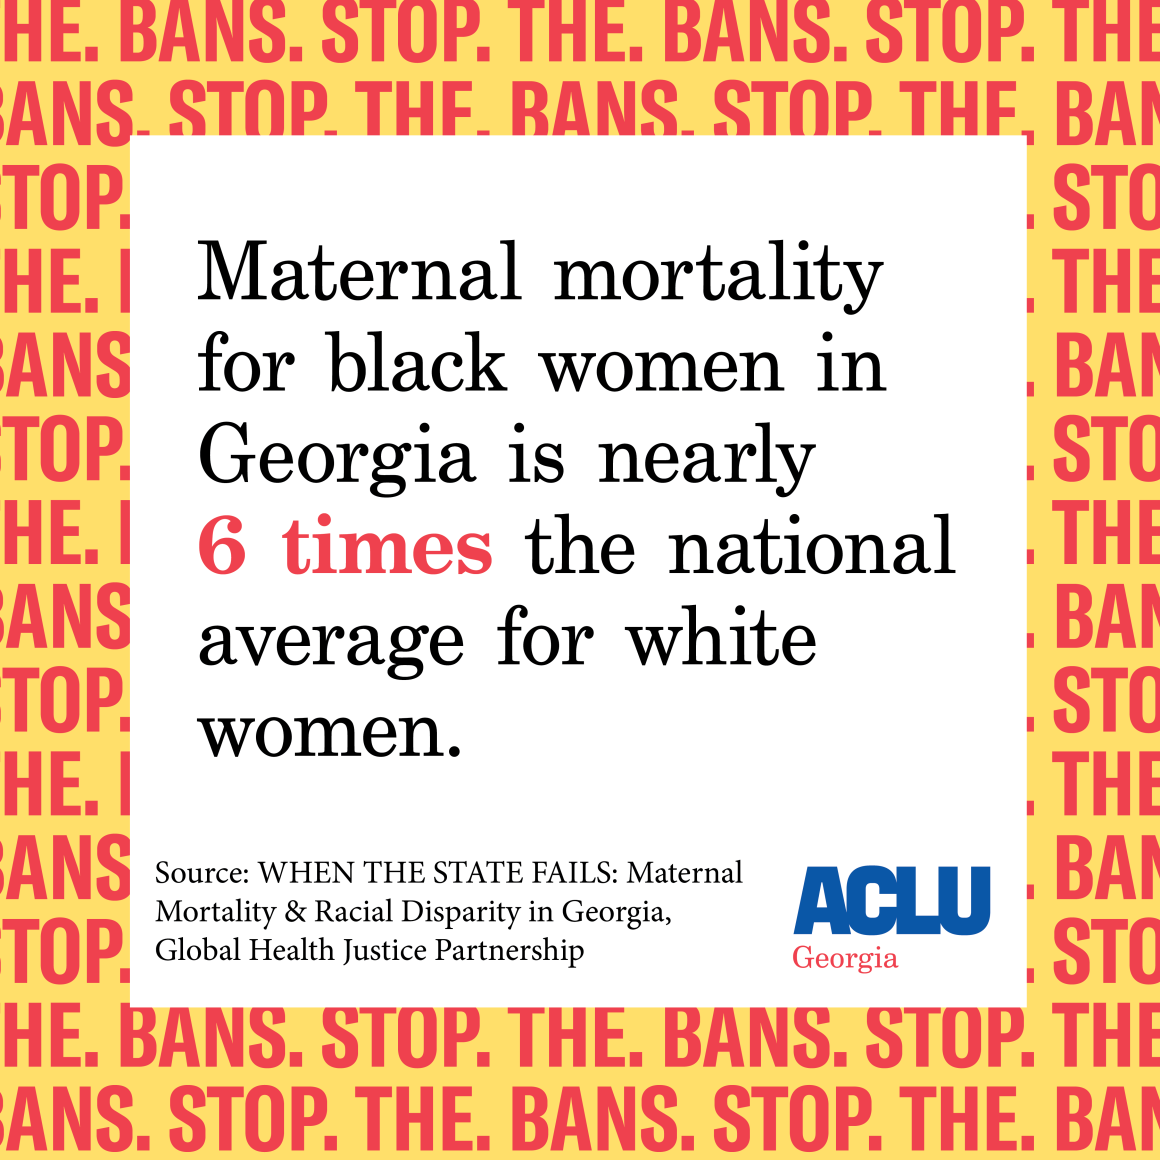 Maternal mortality for black women in Georgia is nearly SIX TIMES the national average for white women.